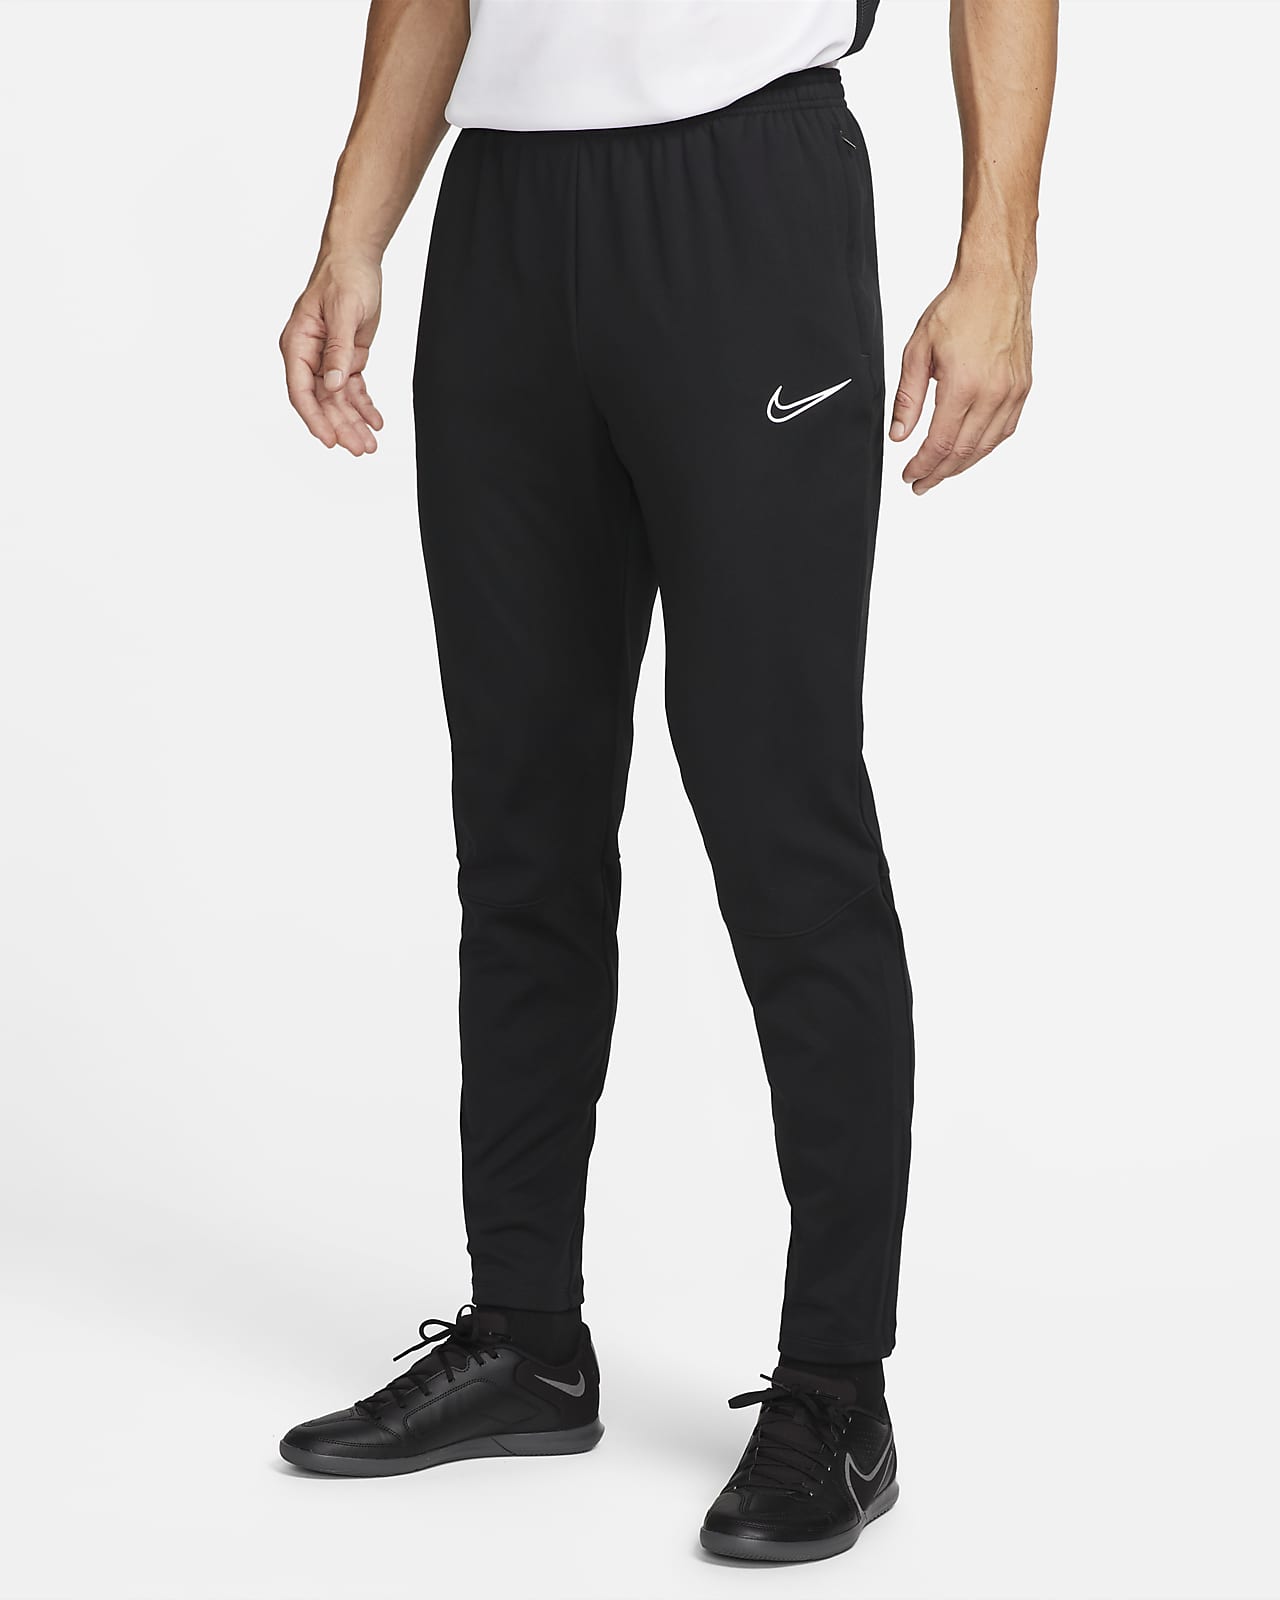 Nike Therma-Fit Academy Winter Men's Football Pants.